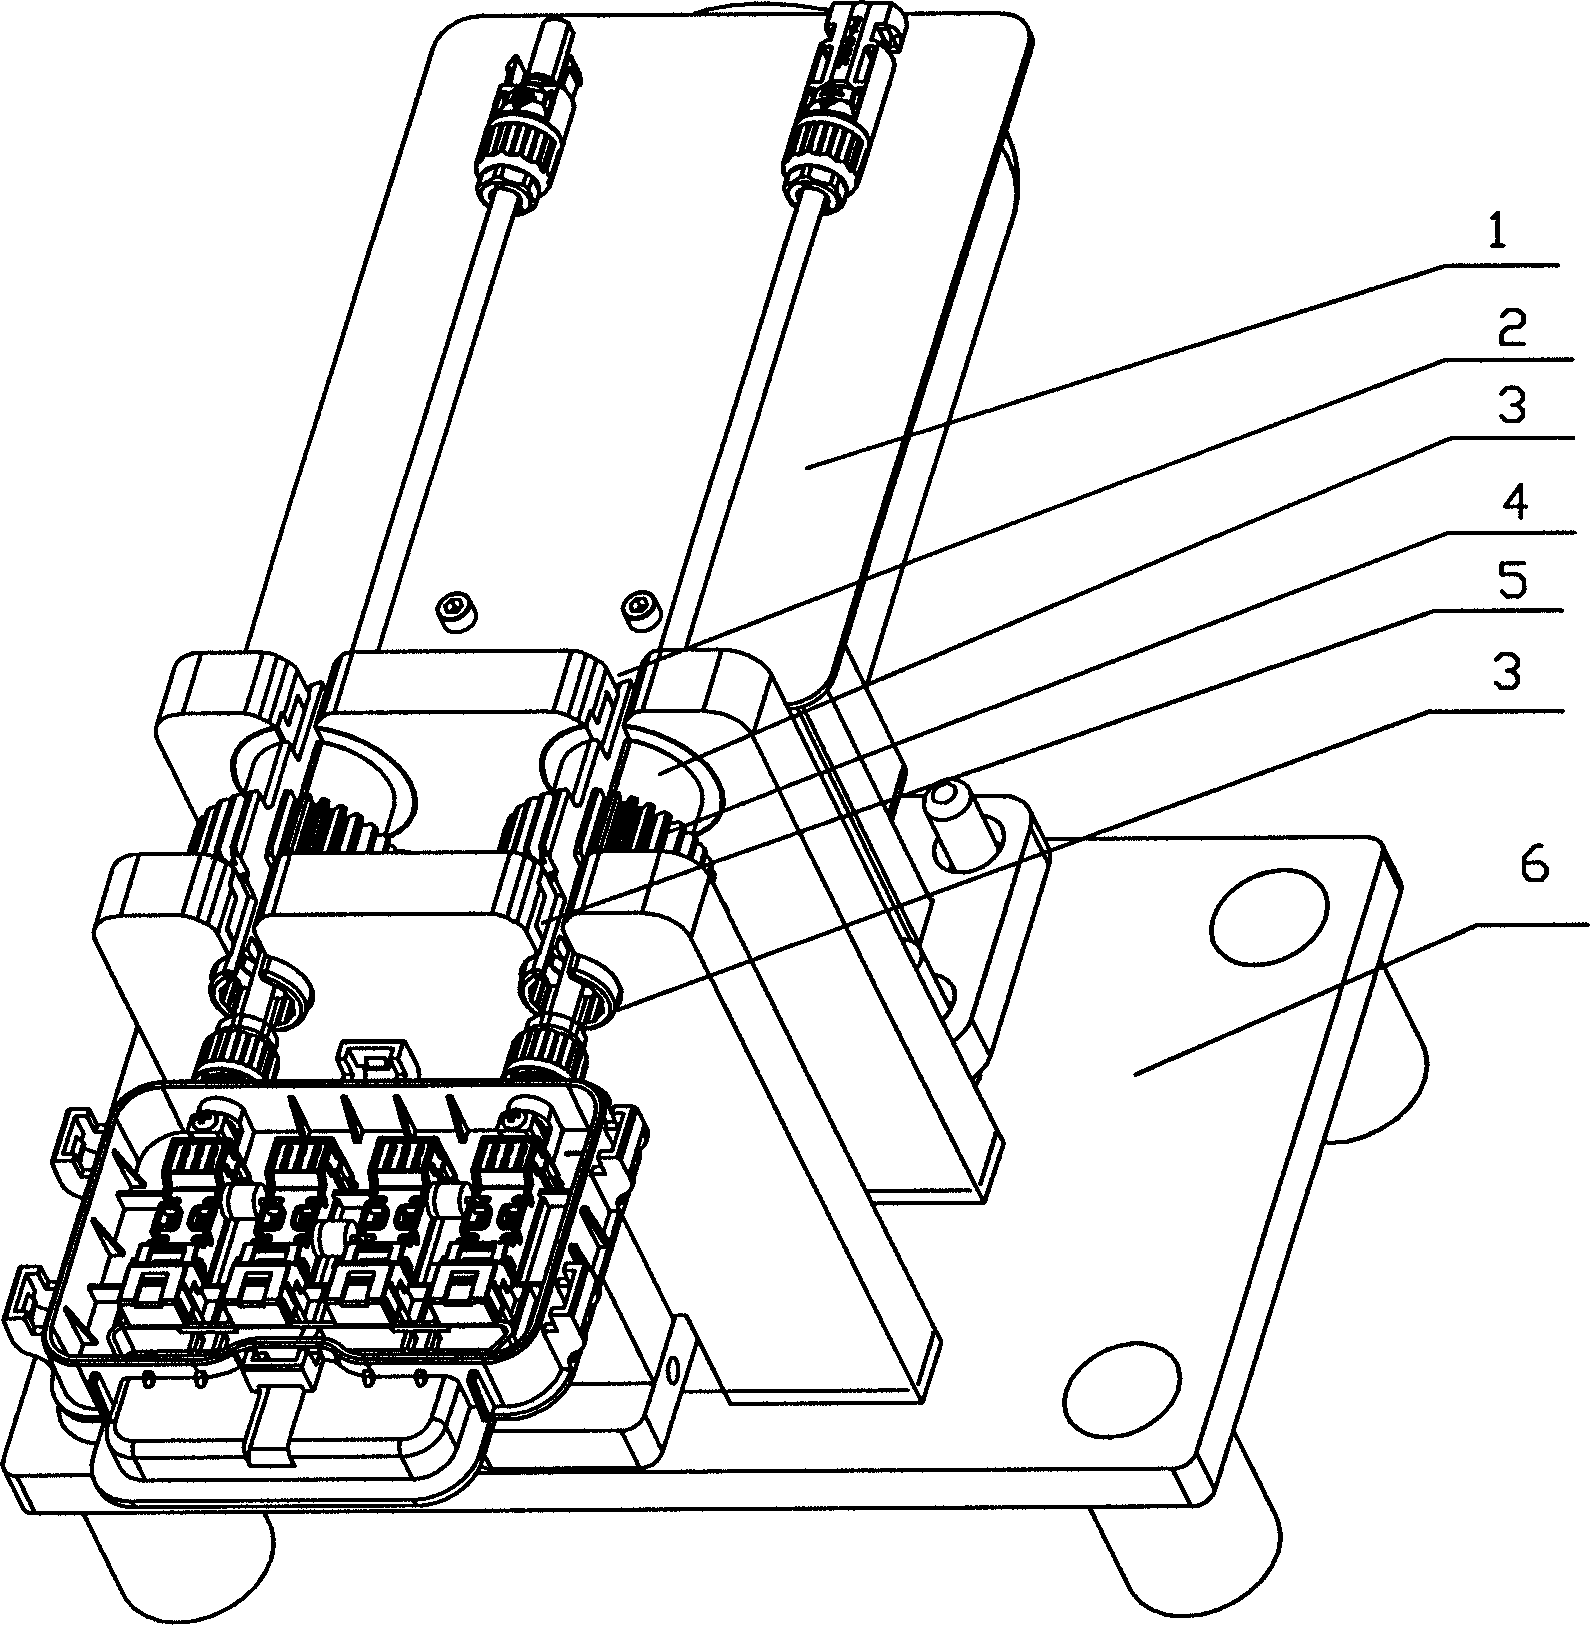 Device for automatically tightening nuts of connecting box